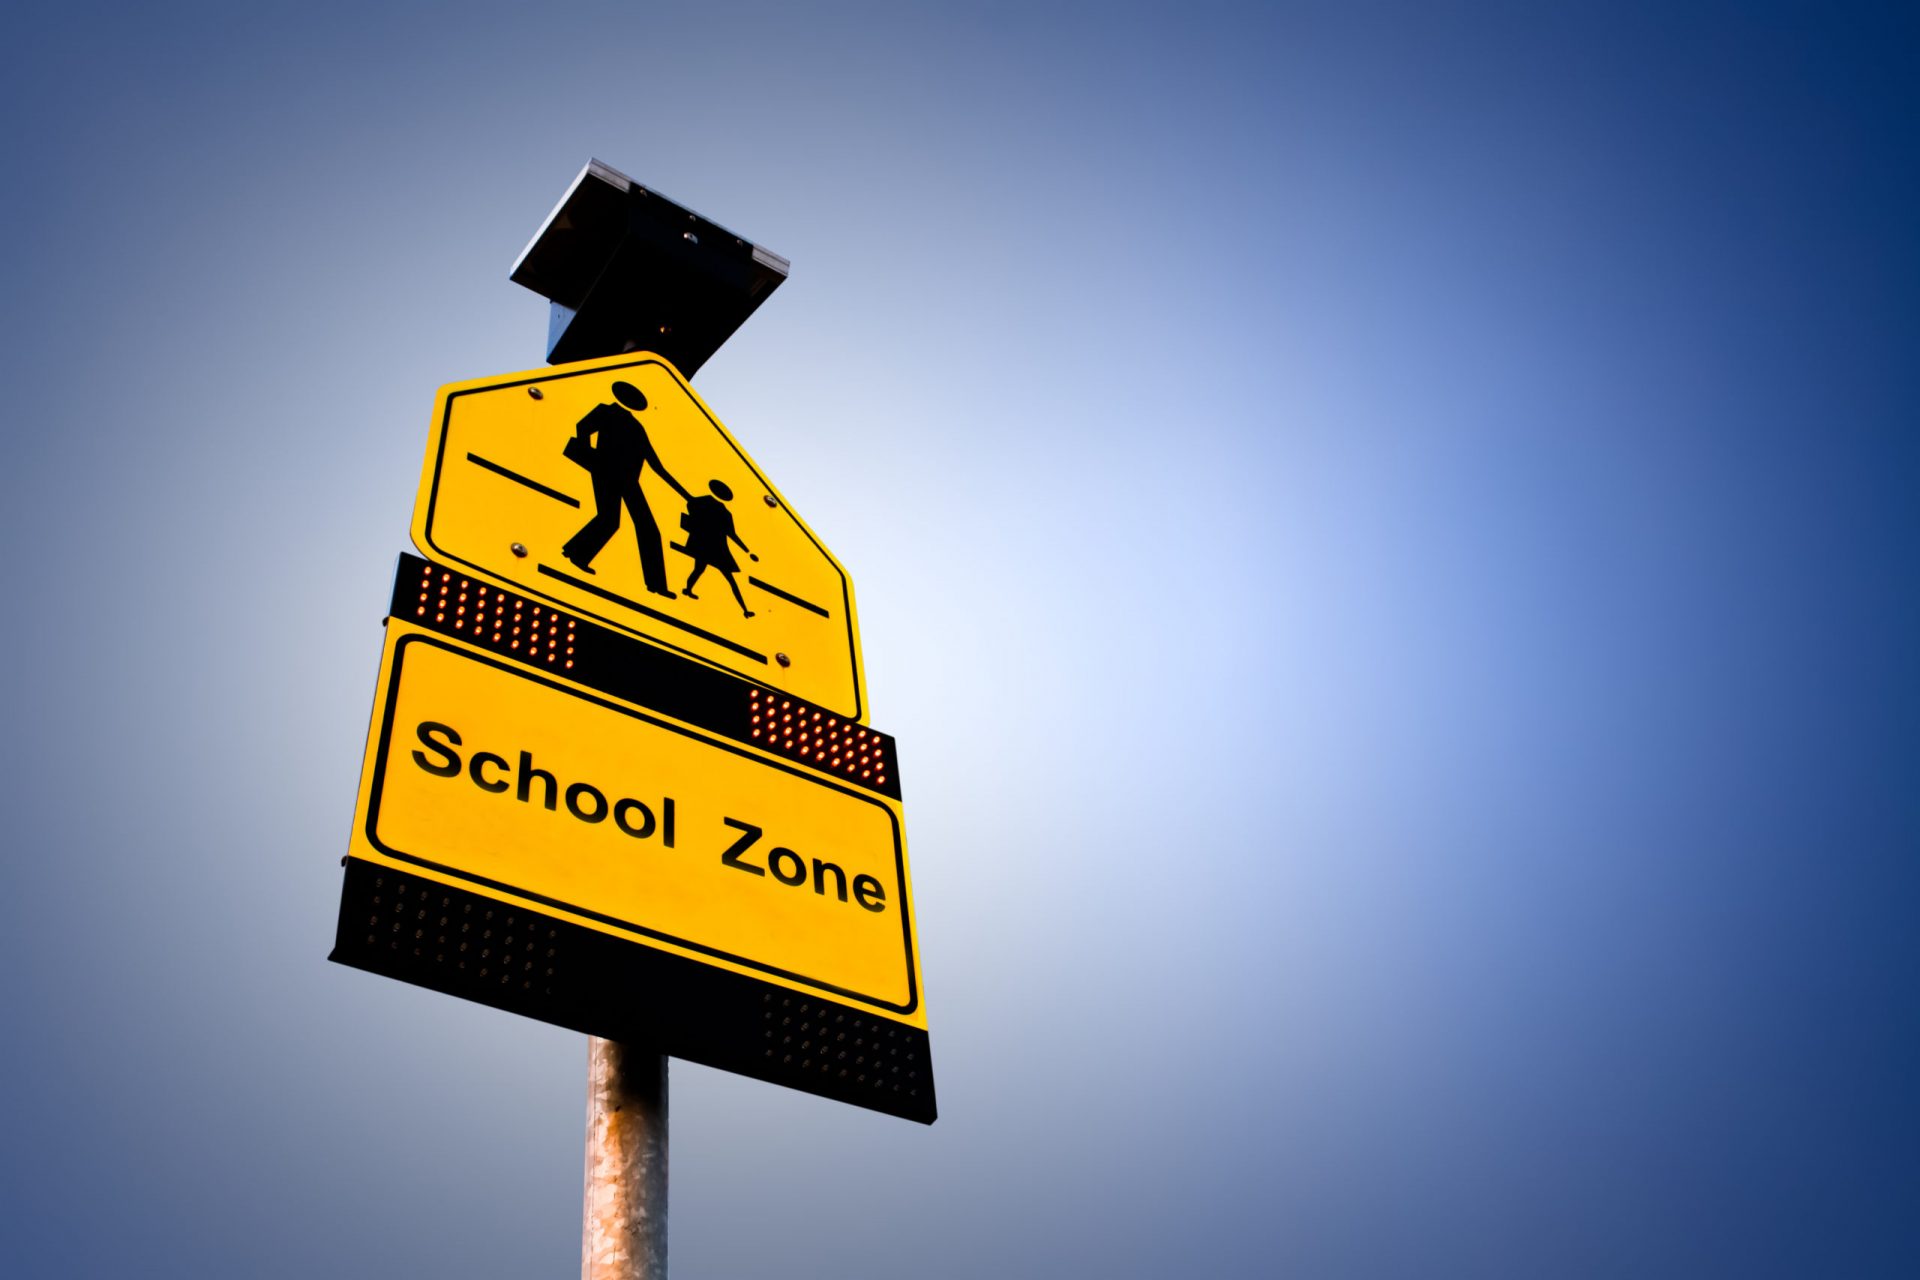 There are many signs that your school campus might benefit from.